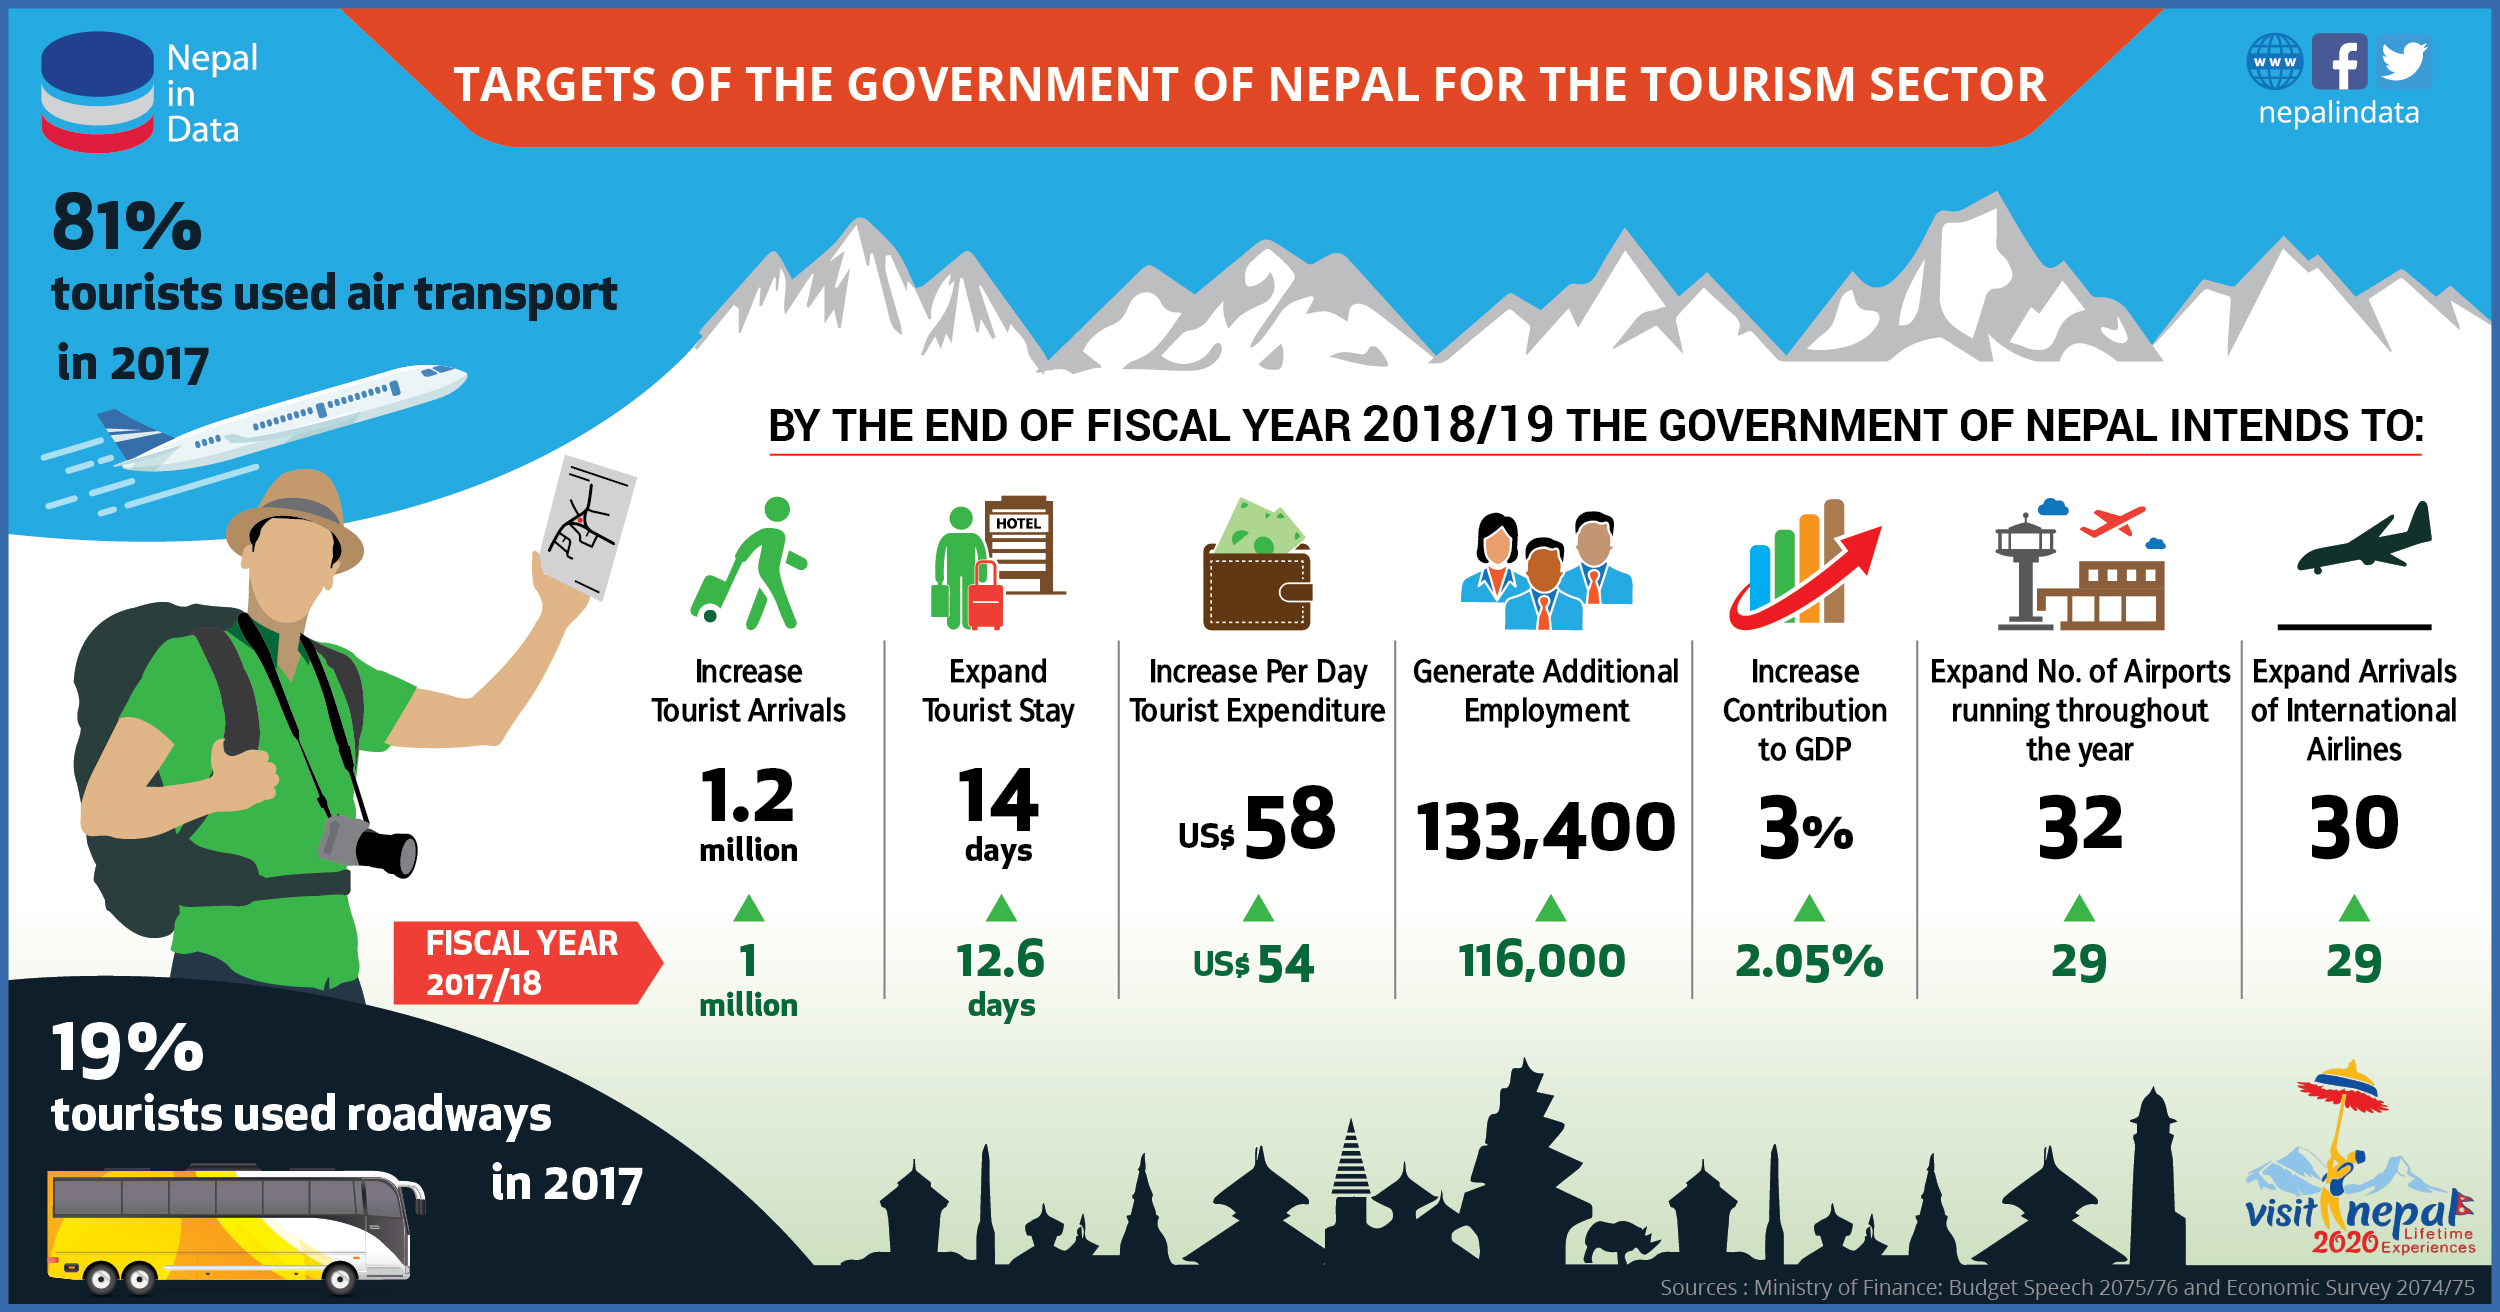 tourism industry nepal